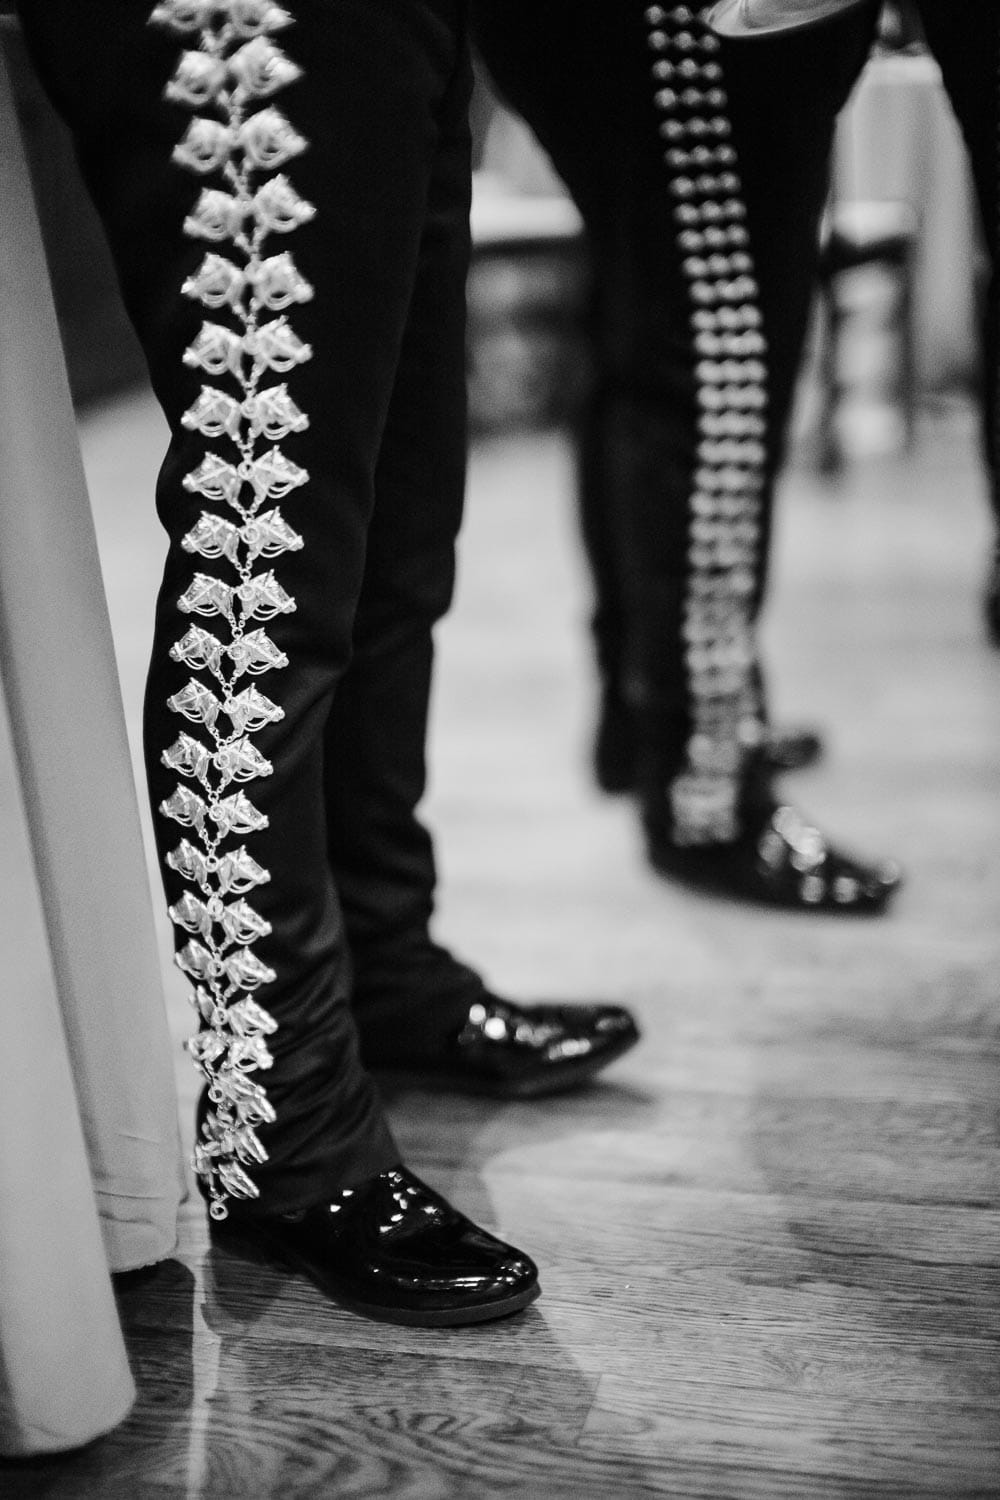 Detail shot of the mariachis costume